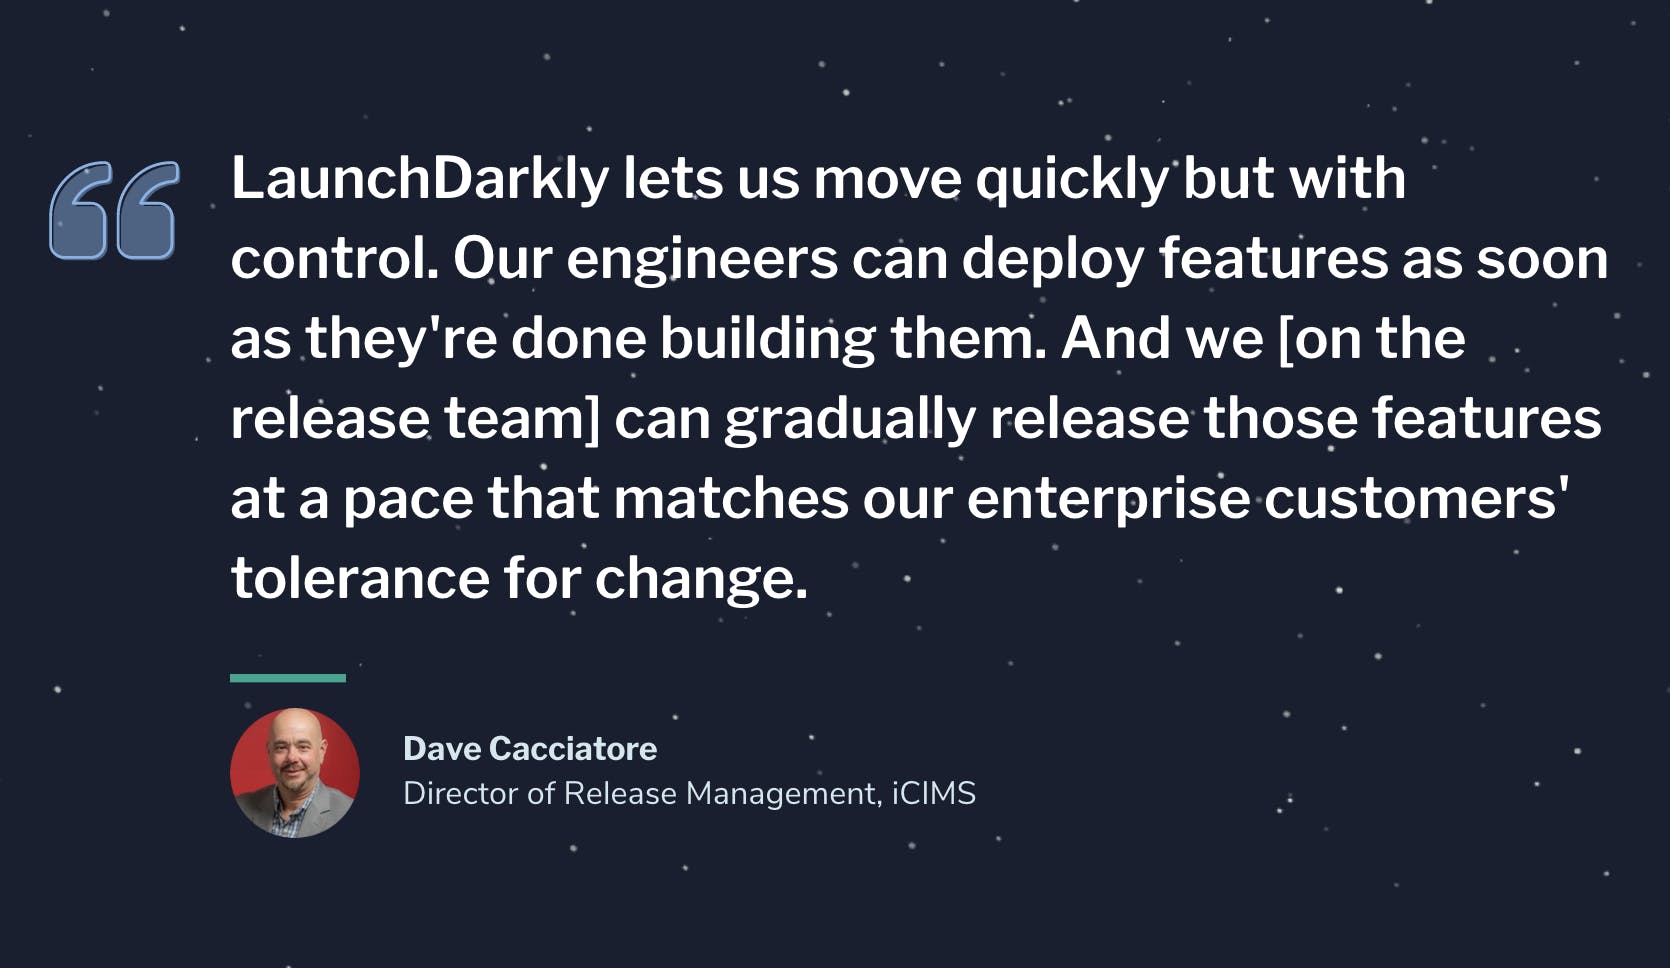 iCIMS-release-manager-quote-LaunchDarkly